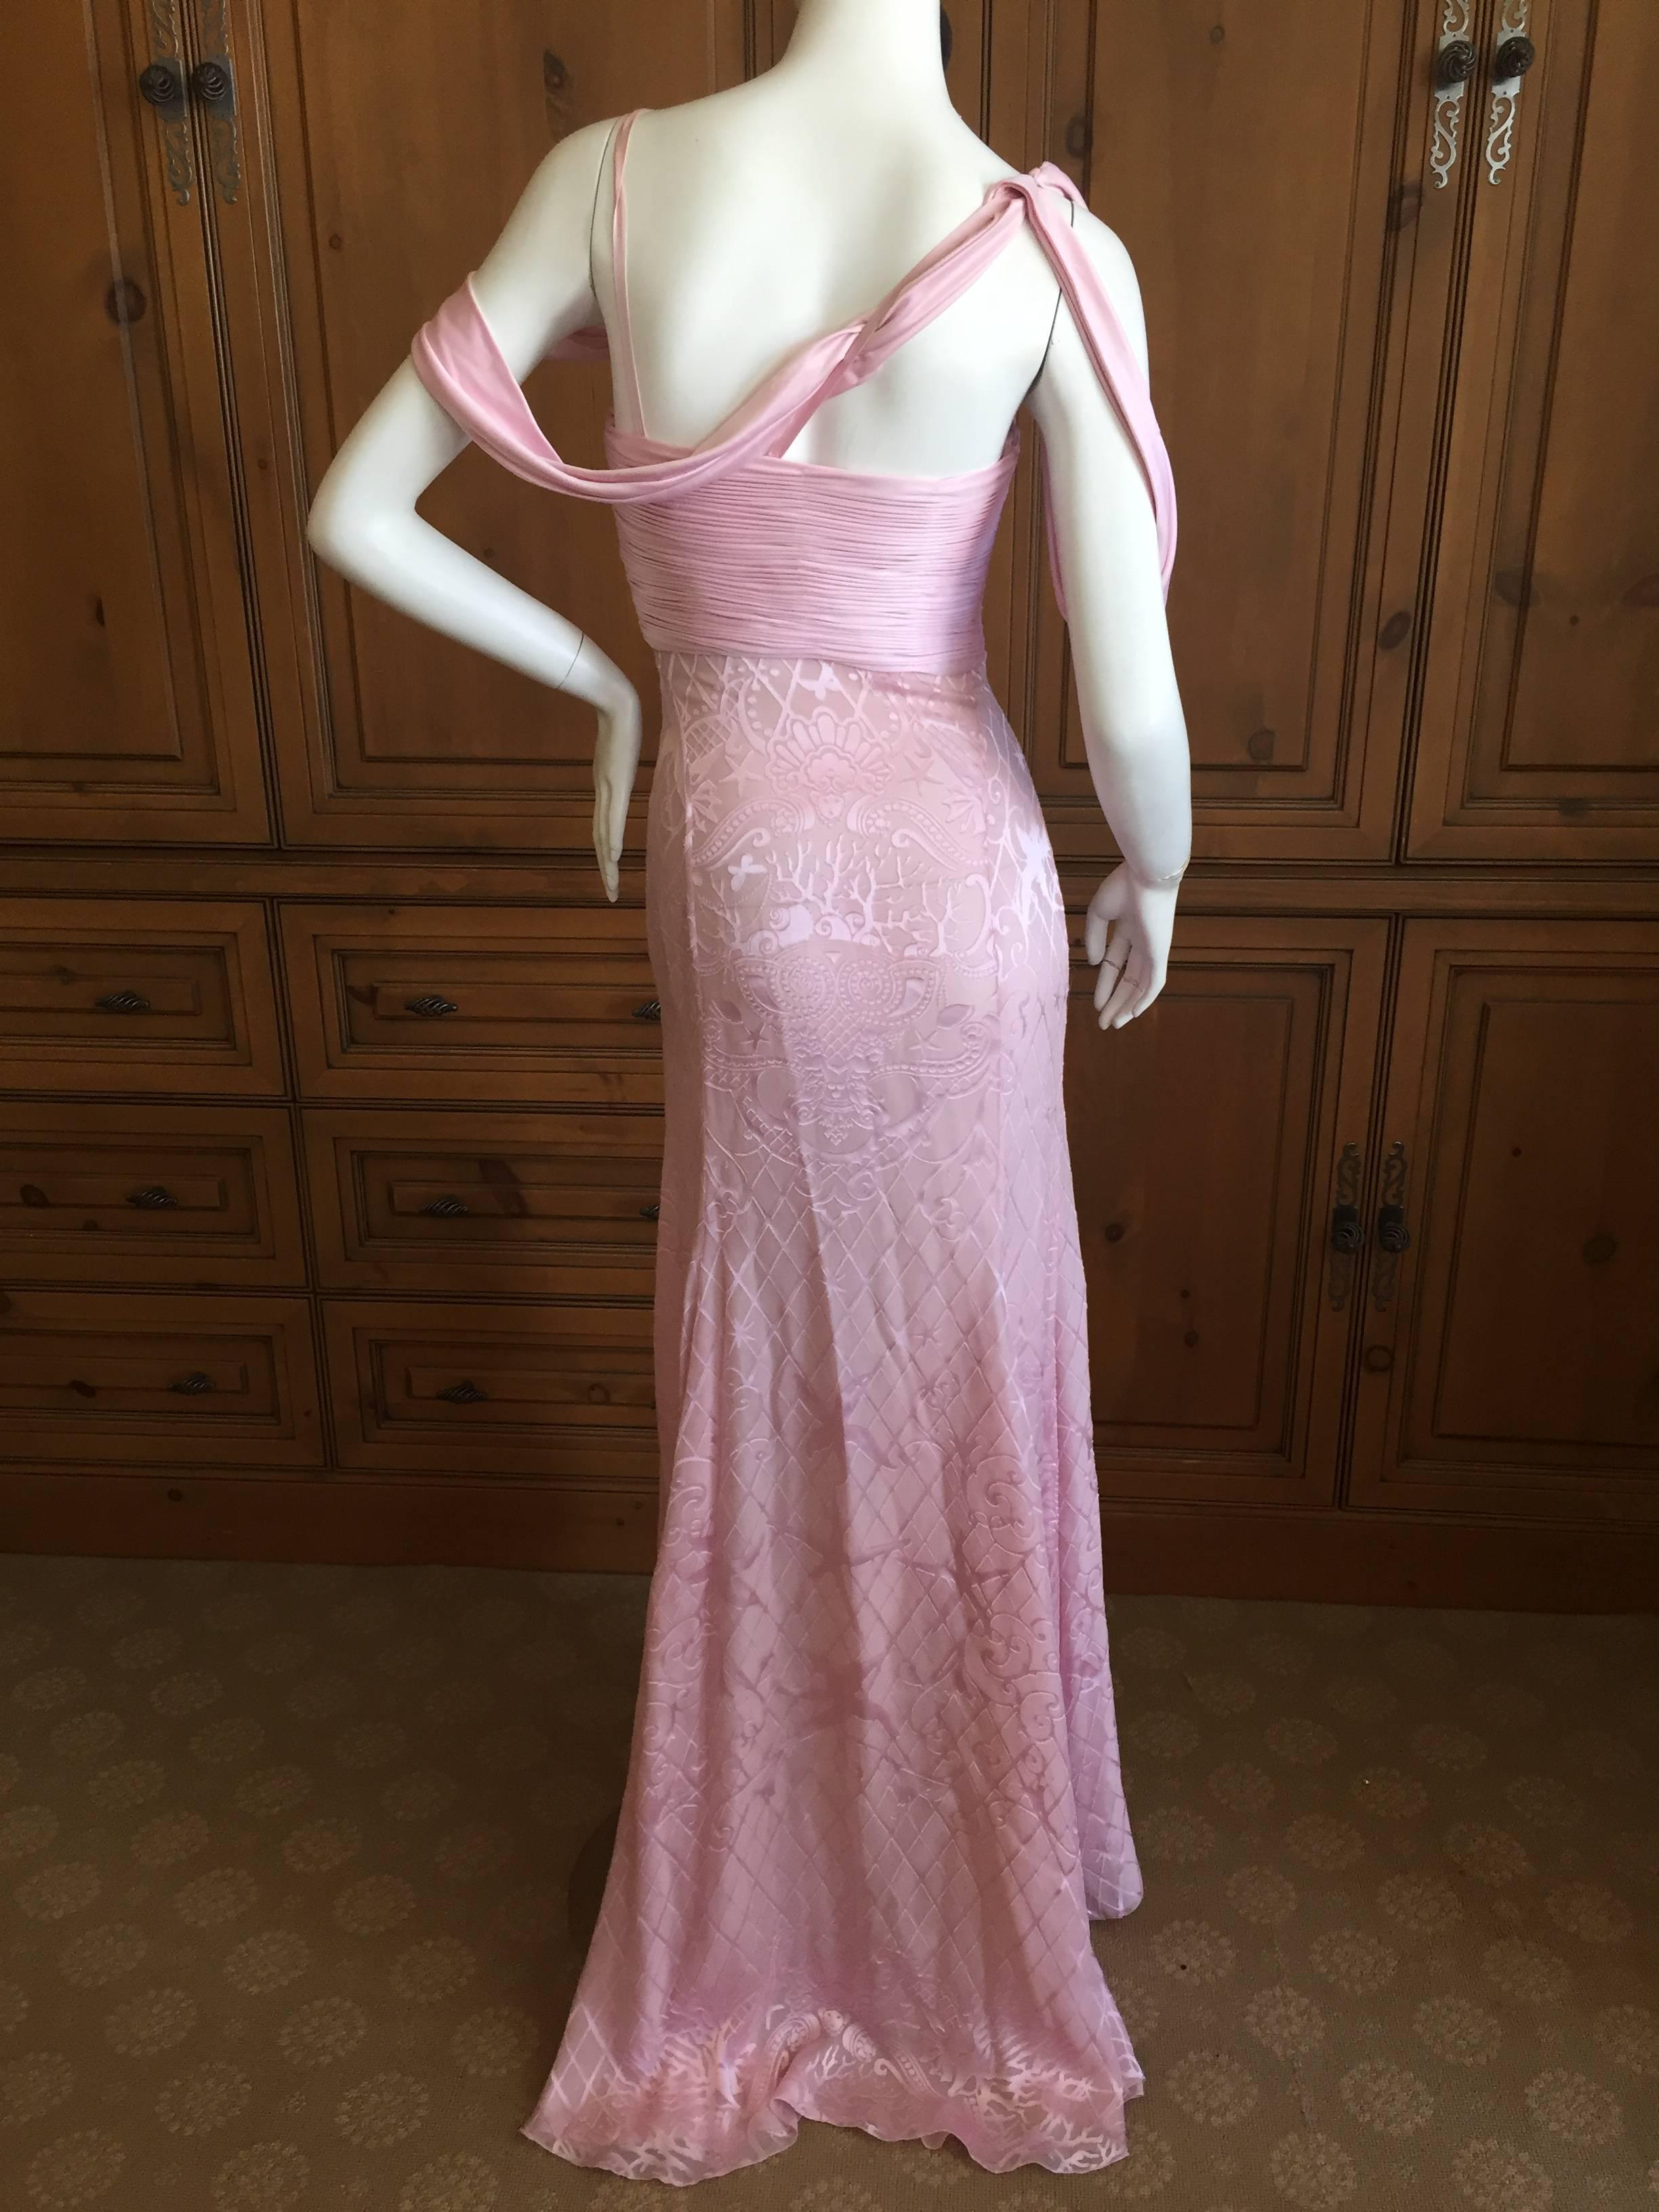 Amazing pink goddess gown from Versace.
Sizzling hot, with pleated bust, great sea life pattern baroque fabric, and a very high sit. 
Designed by Donatella at her best, this is a wonderful Versace.
Size 38
Bust 36